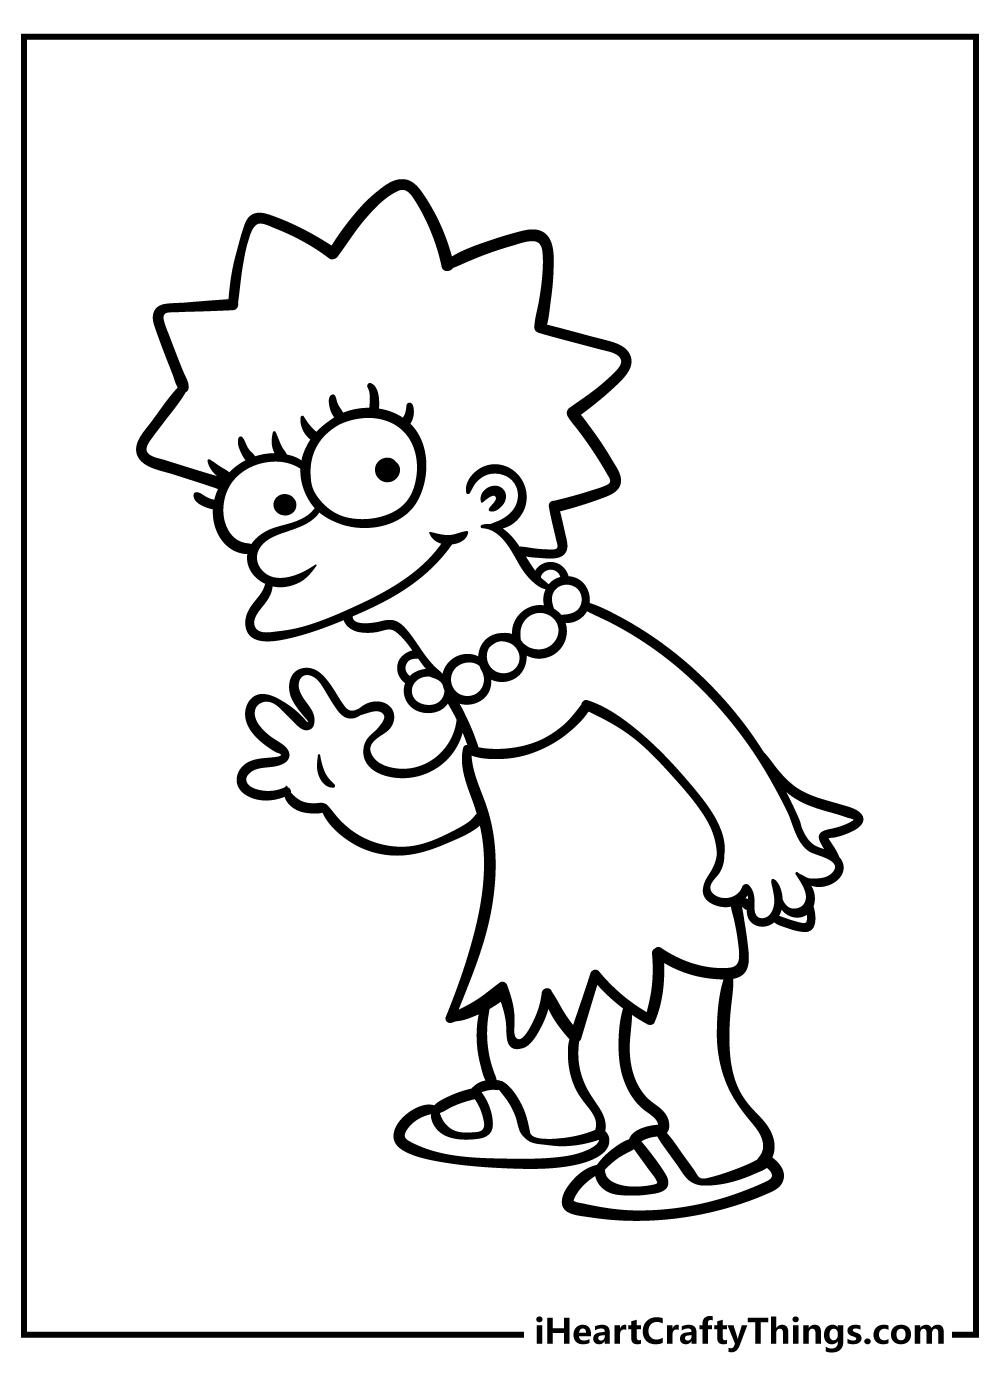 Simpsons coloring pages free printables